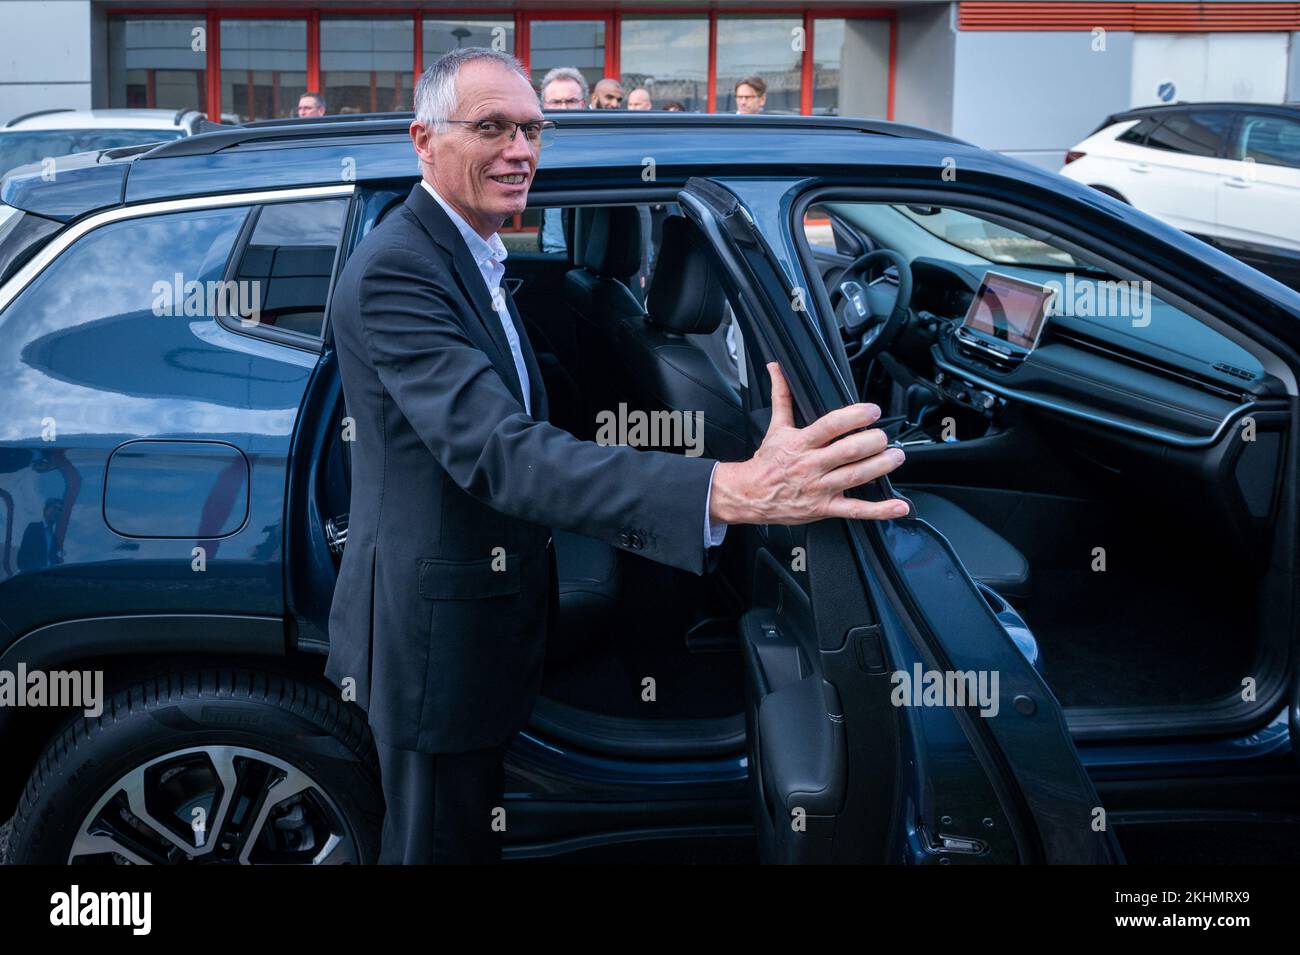 CEO of Stellantis Carlos Tavares arrives to a press conference at the Stellantis cars factory in Hordain, northern France on October 27, 2022. The Stellantis group, born from the merger of PSA and Fiat-Chrysler, will launch the mass production of hydrogen-powered commercial vehicles in its factory located in Hordain, northern France, the carmaker's CEO, Carlos Tavares, announced on October 27, 2022. Photo by Sarah Alcalay/ABACAPRESS.COM Stock Photo